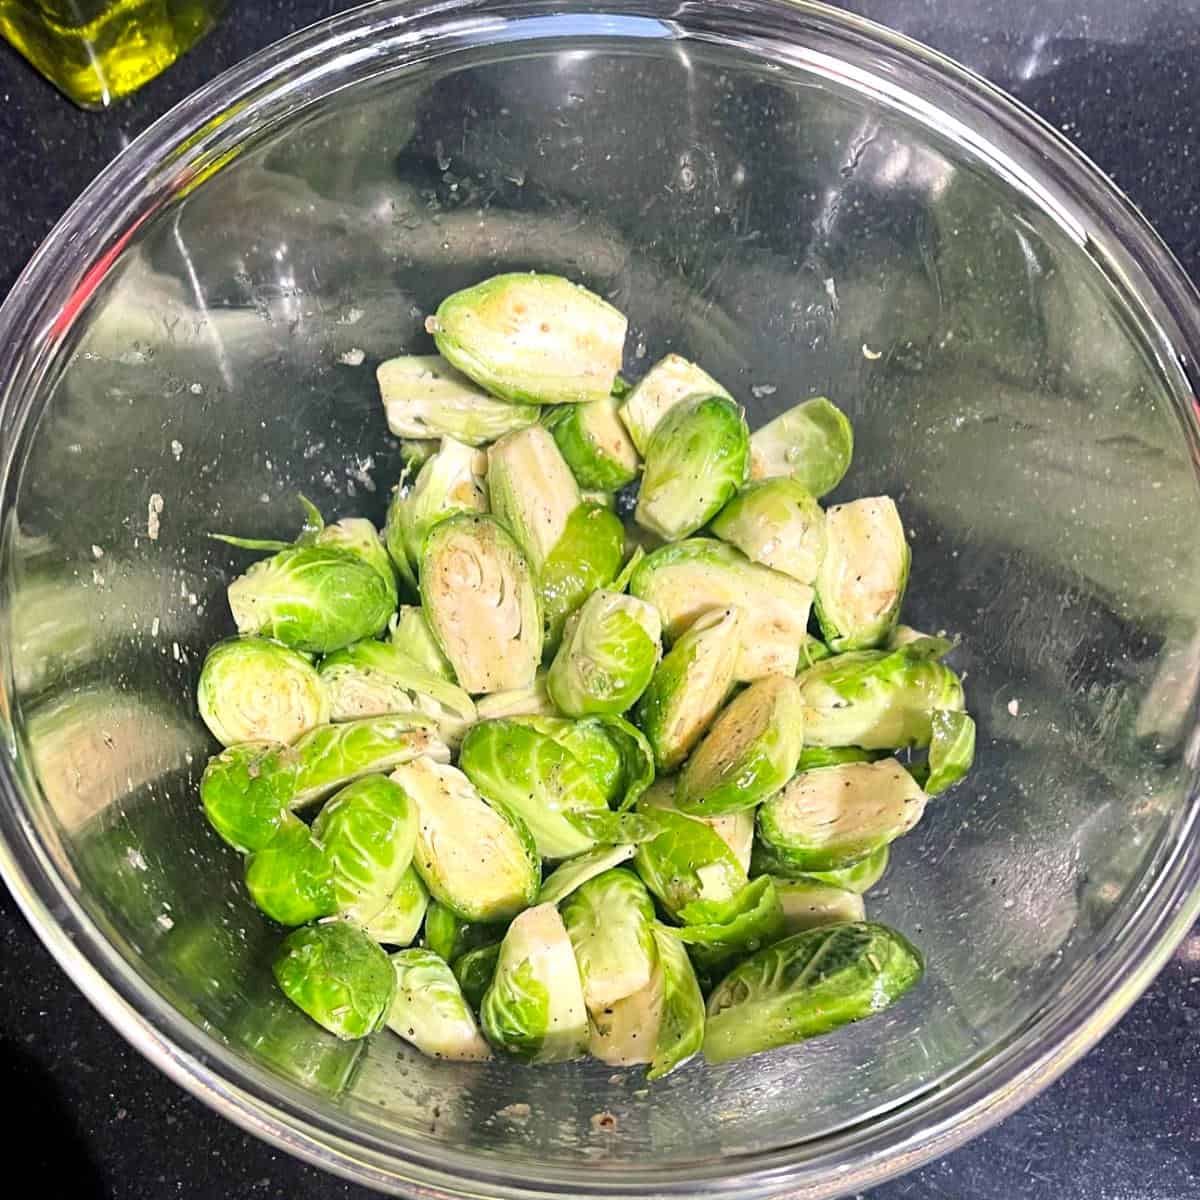 Brussels sprouts tossed with oil and seasonings in bowl.